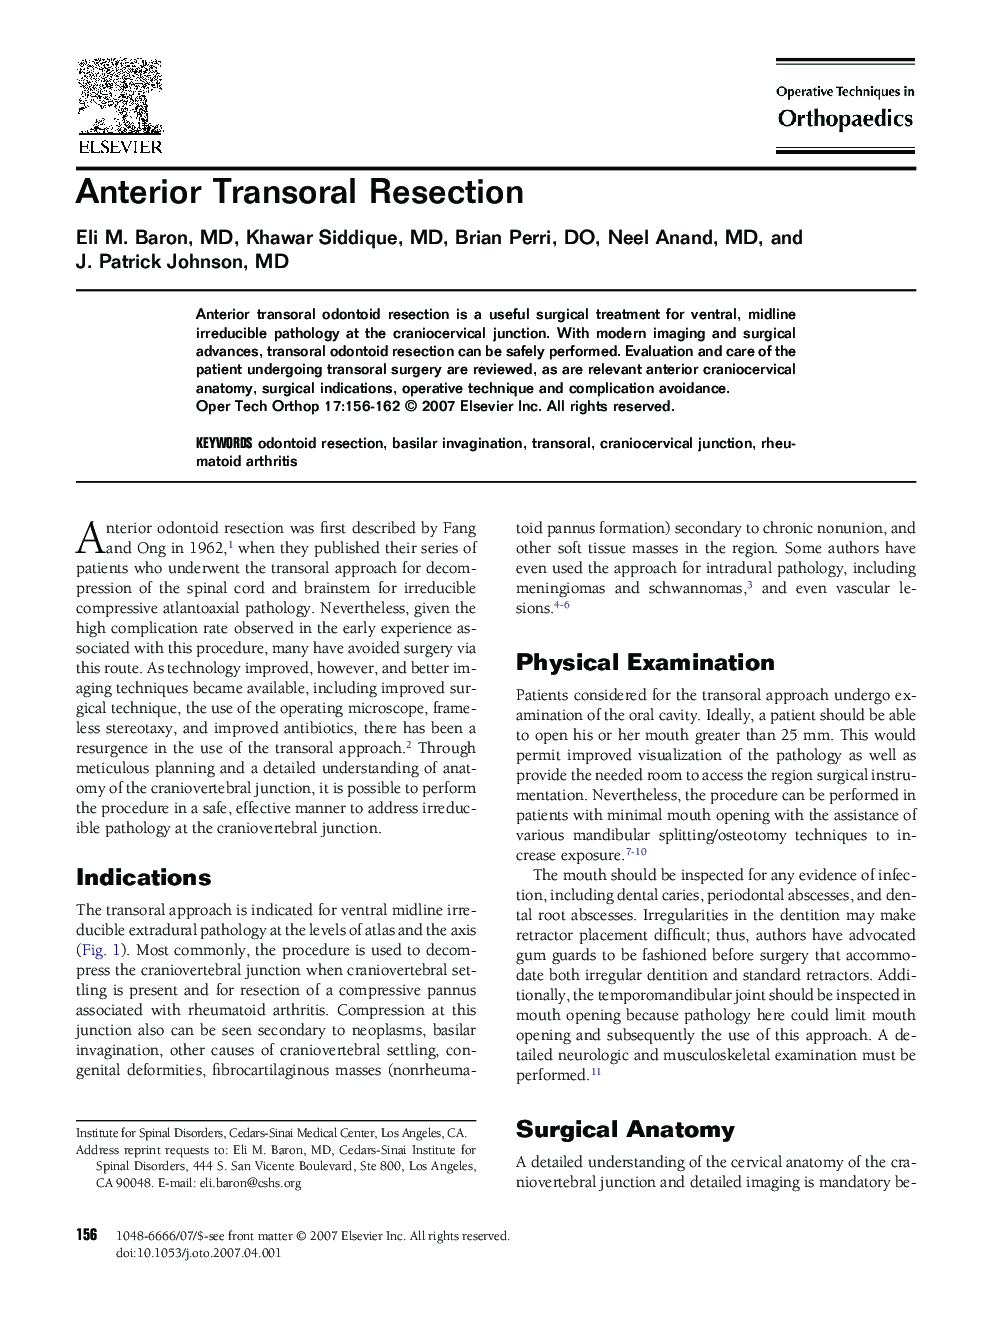 Anterior Transoral Resection